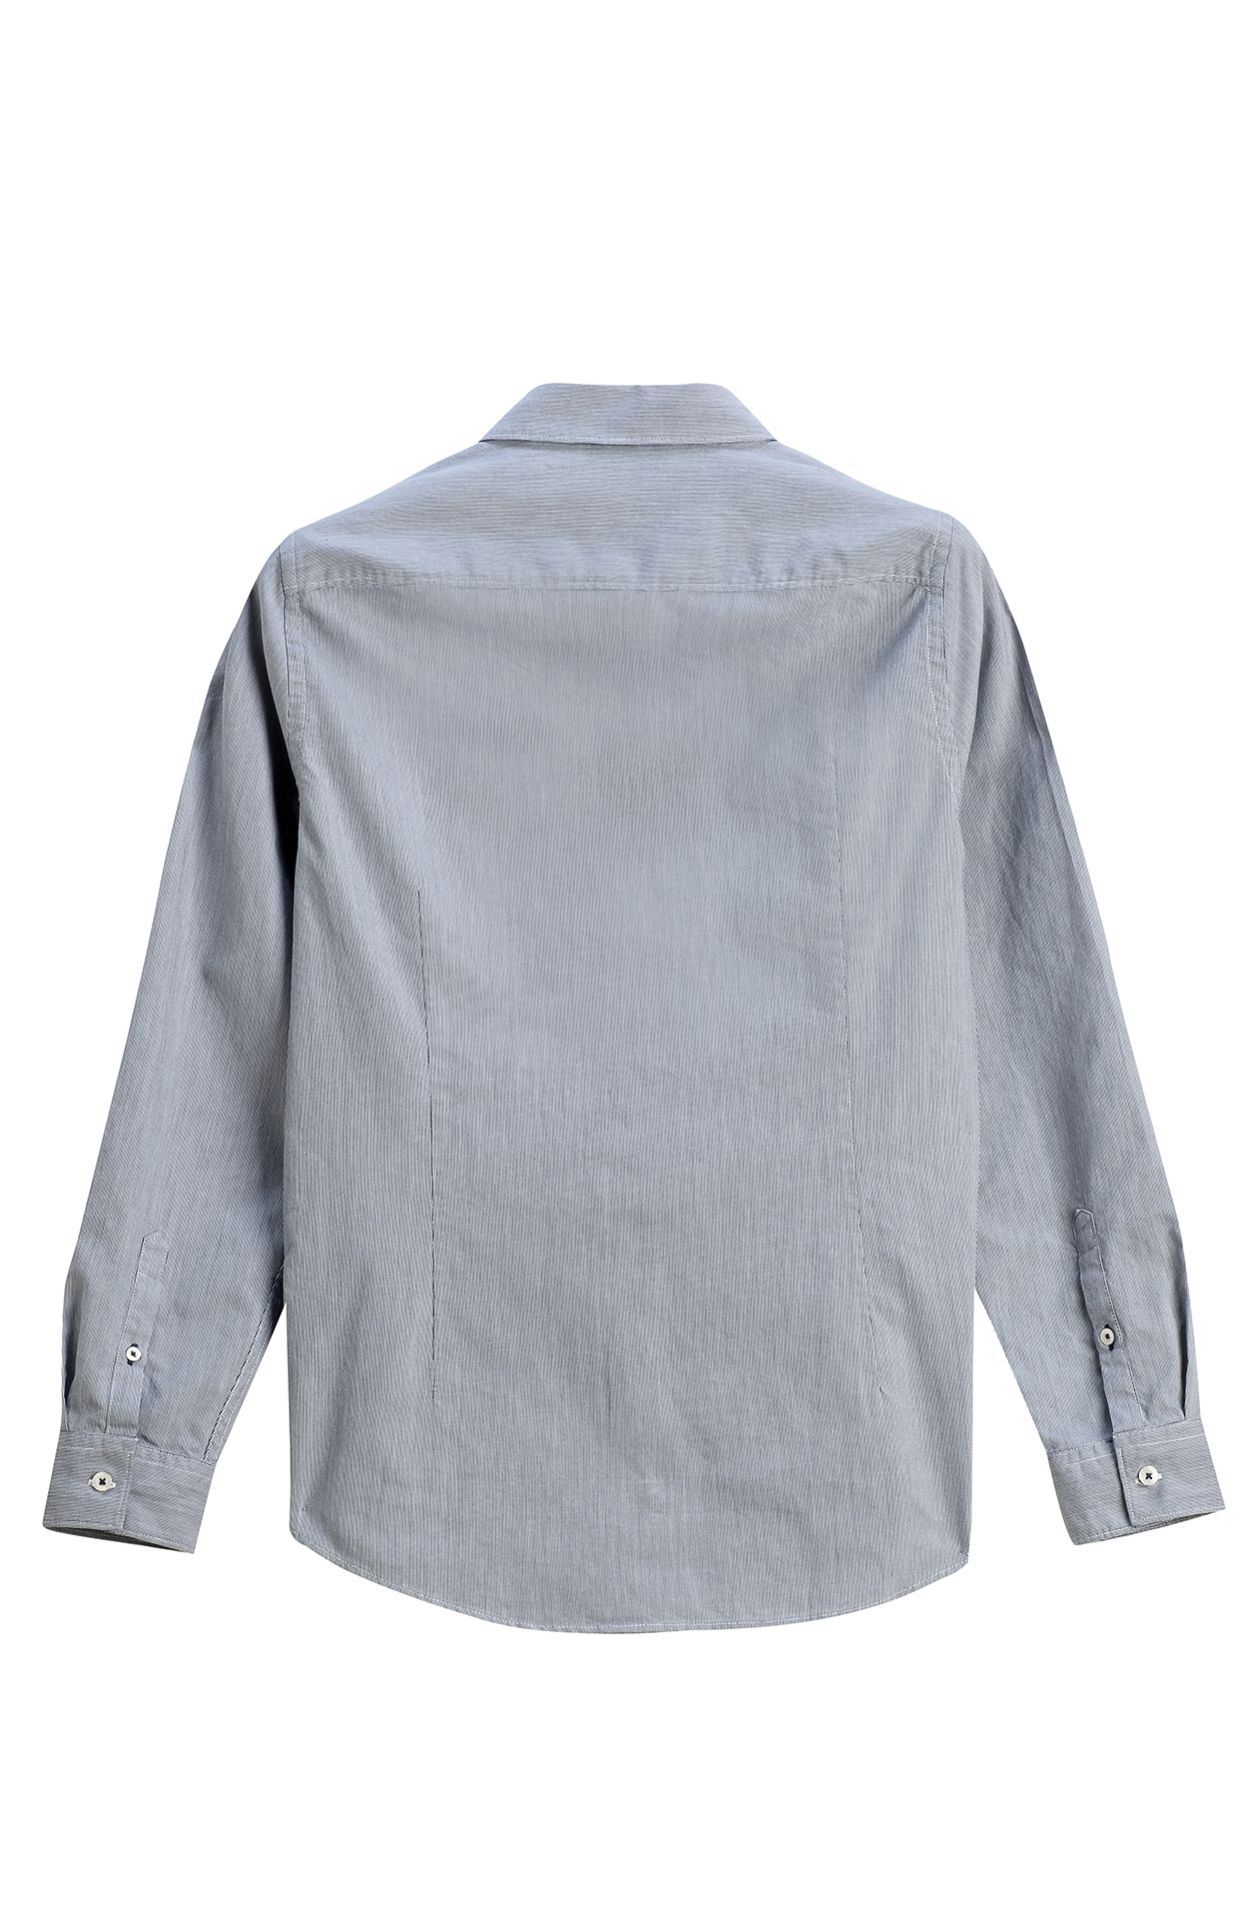 PURE COTTON LONG-SLEEVED SHIRT